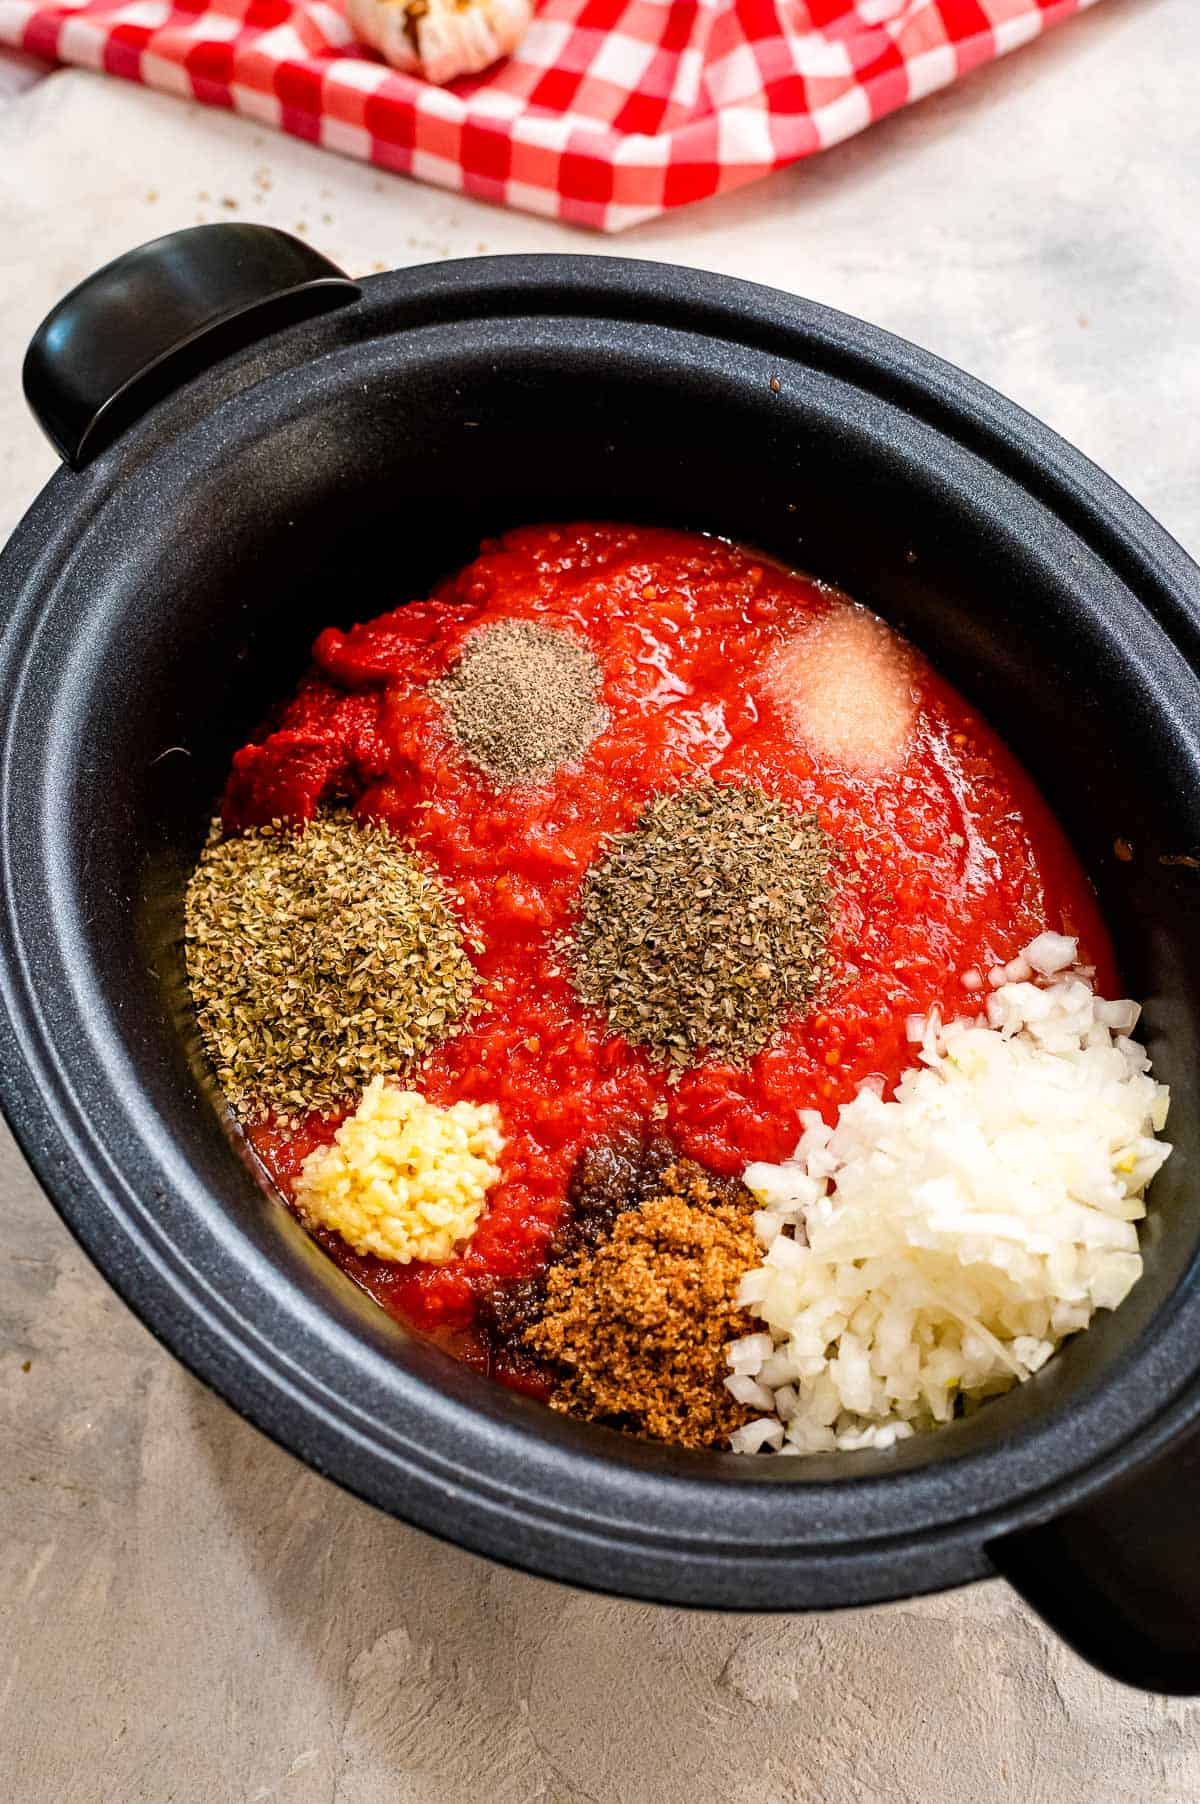 Black crock pot liner with ingredients to make spaghetti sauce